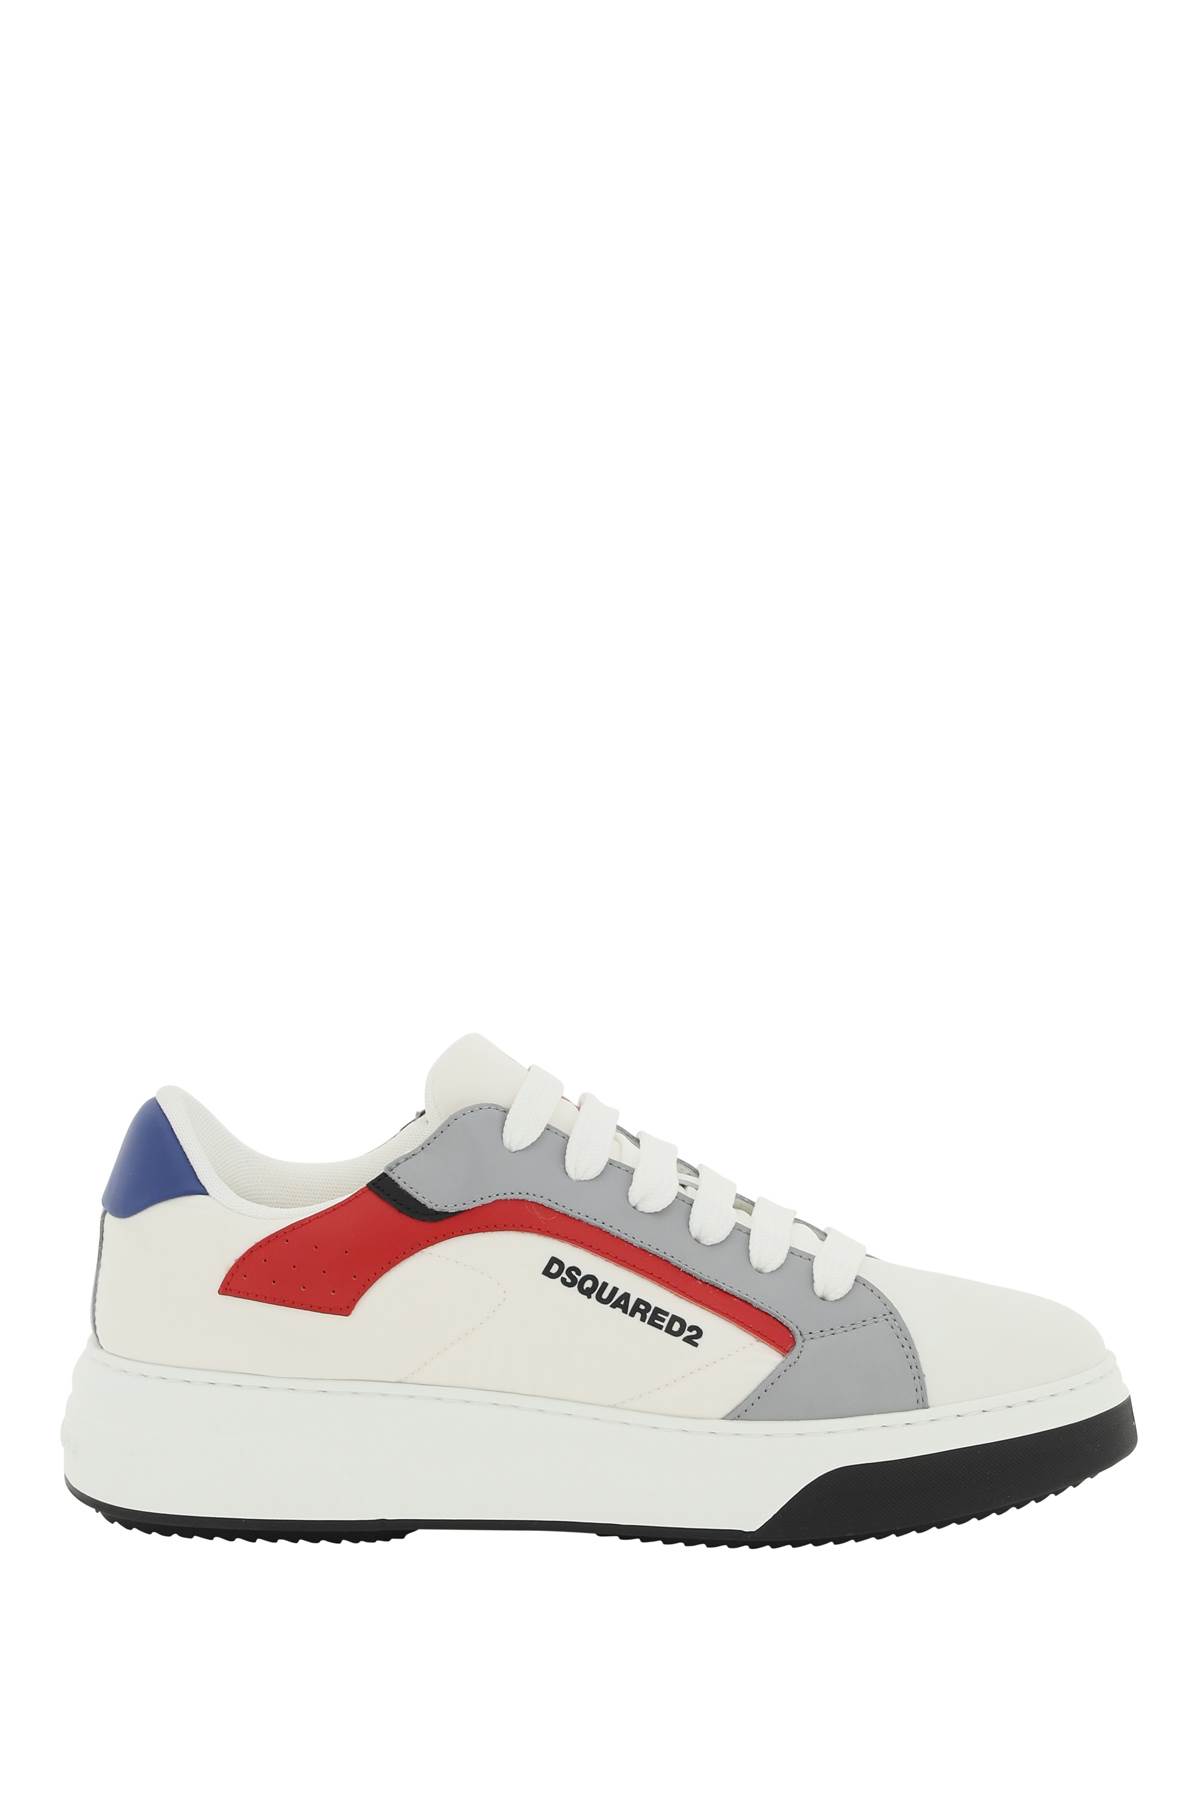 Dsquared2 Nylon And Leather bumper Sneakers